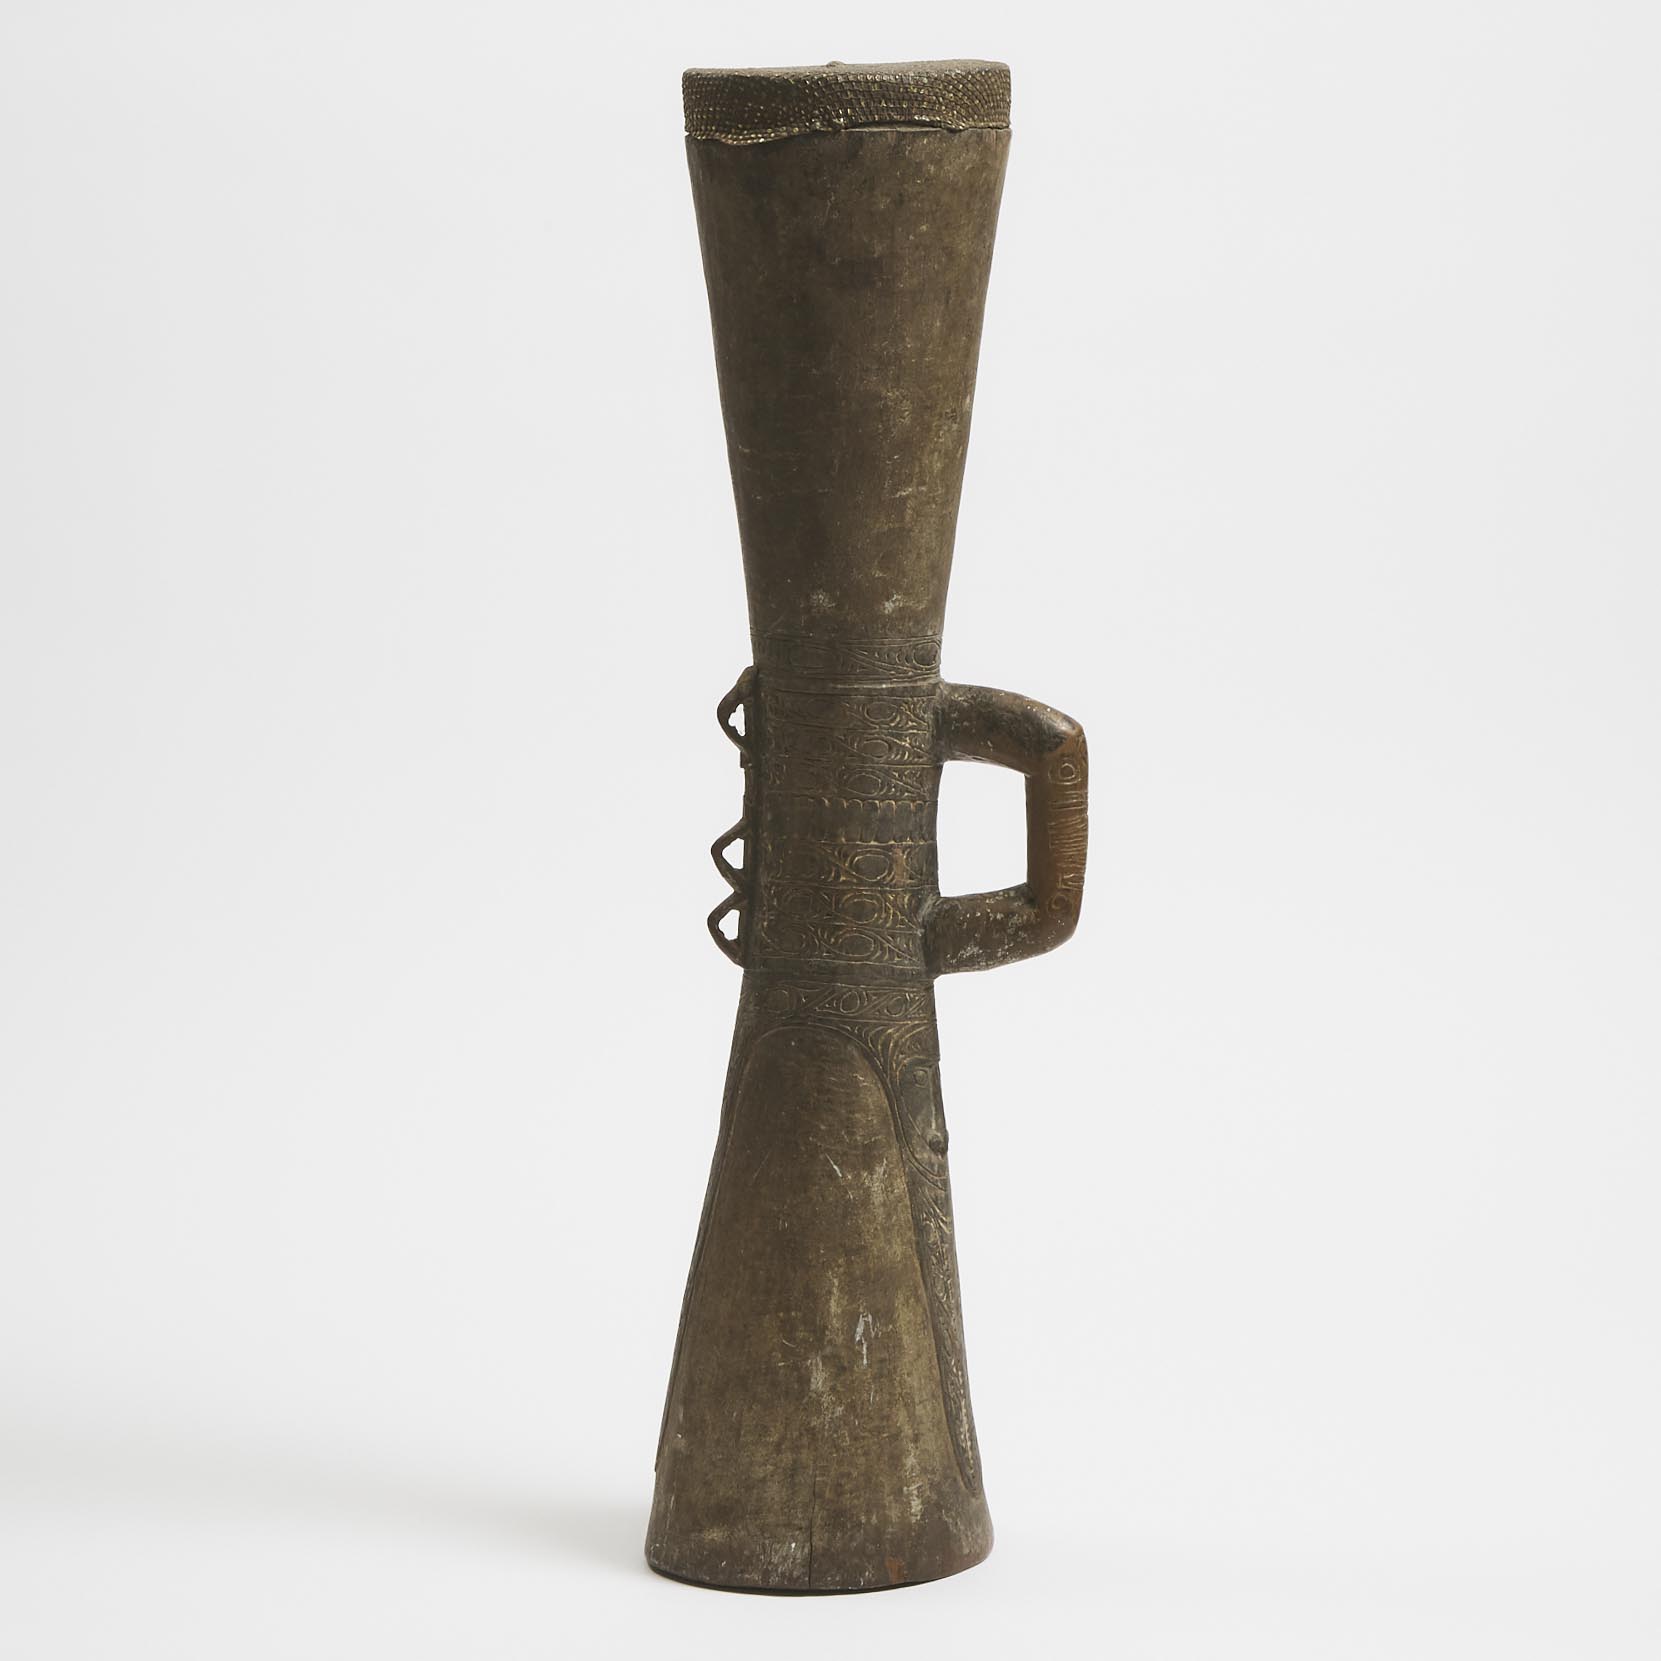 Iatmul Kundu (Drum), Middle Sepik River, Papua New Guinea, early to mid 20th century